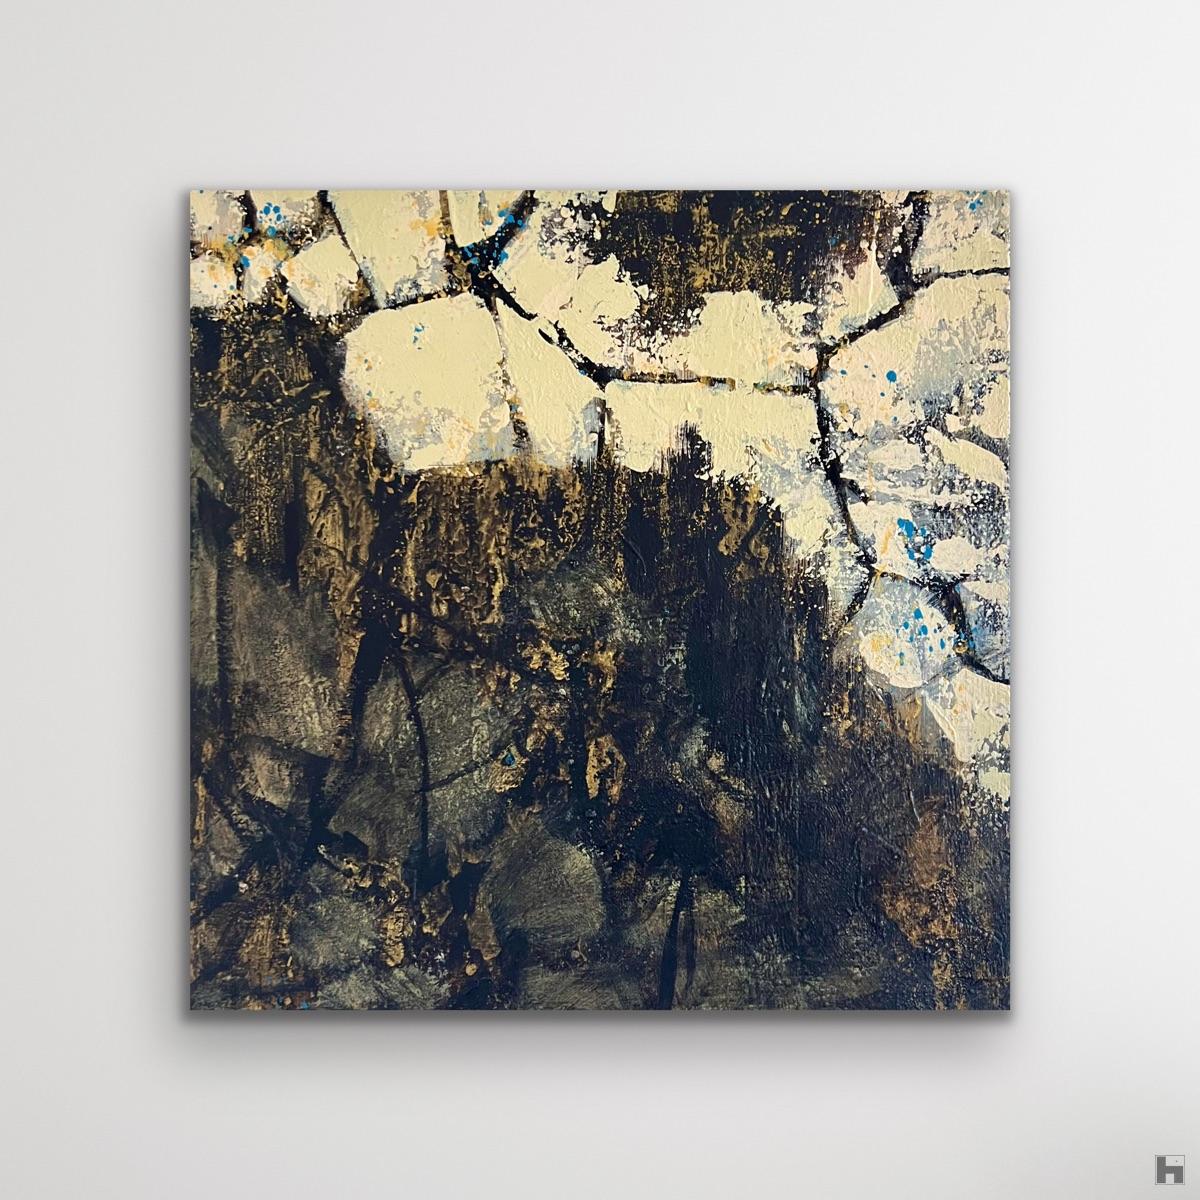 A small and lively painting in black and gold on a white wall